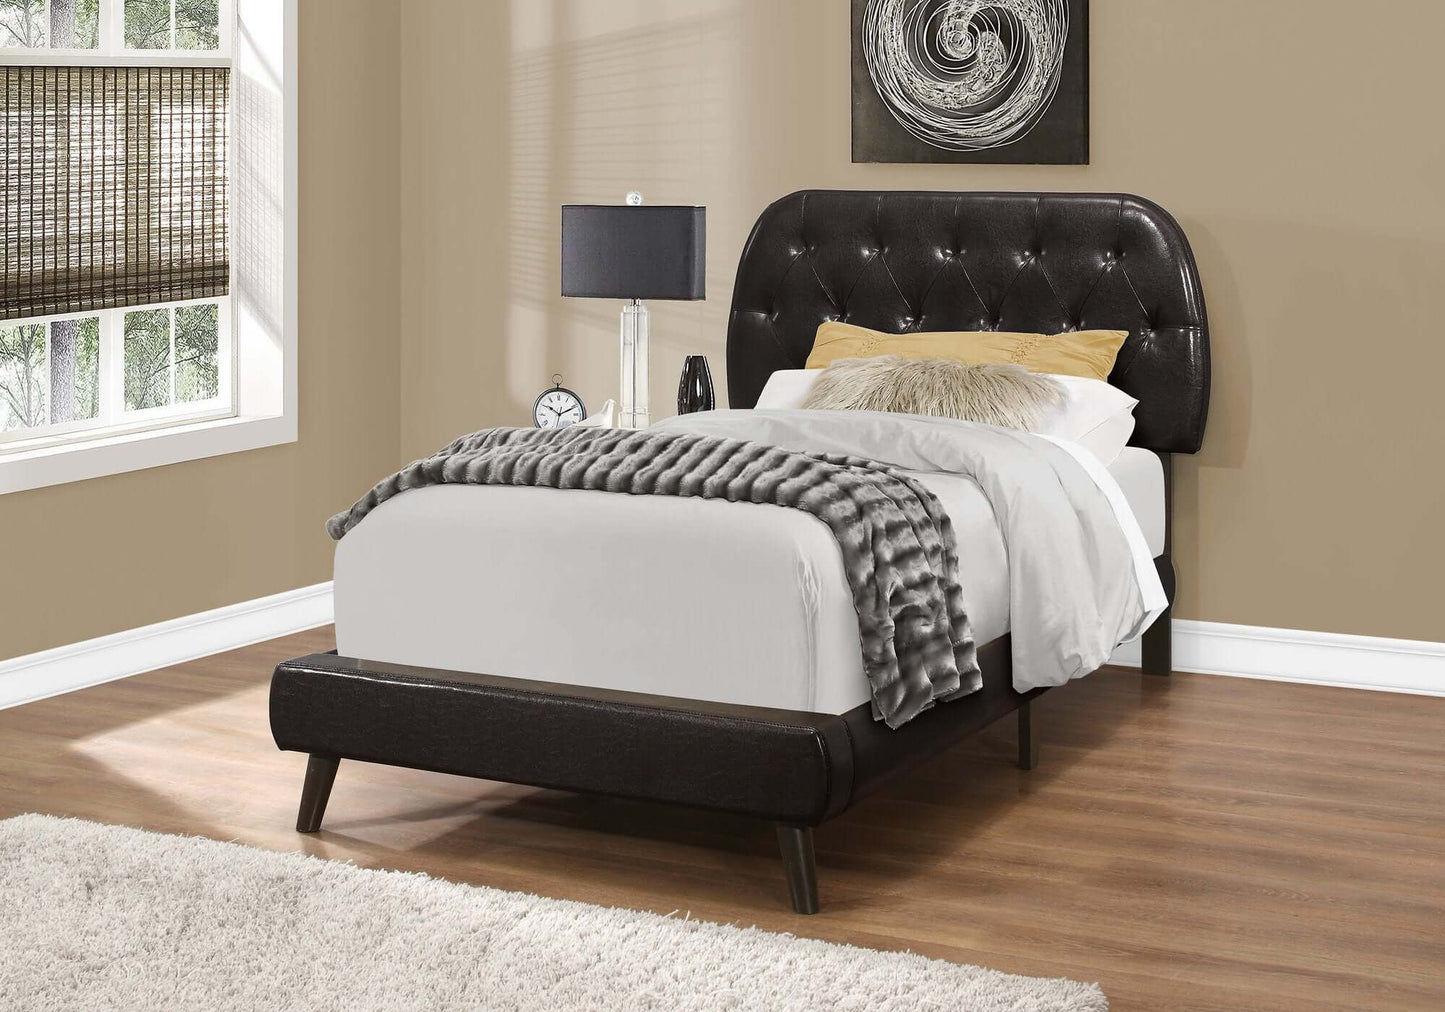 Upholstered Bed in Brown Leather Look with Dark brown Wood Legs